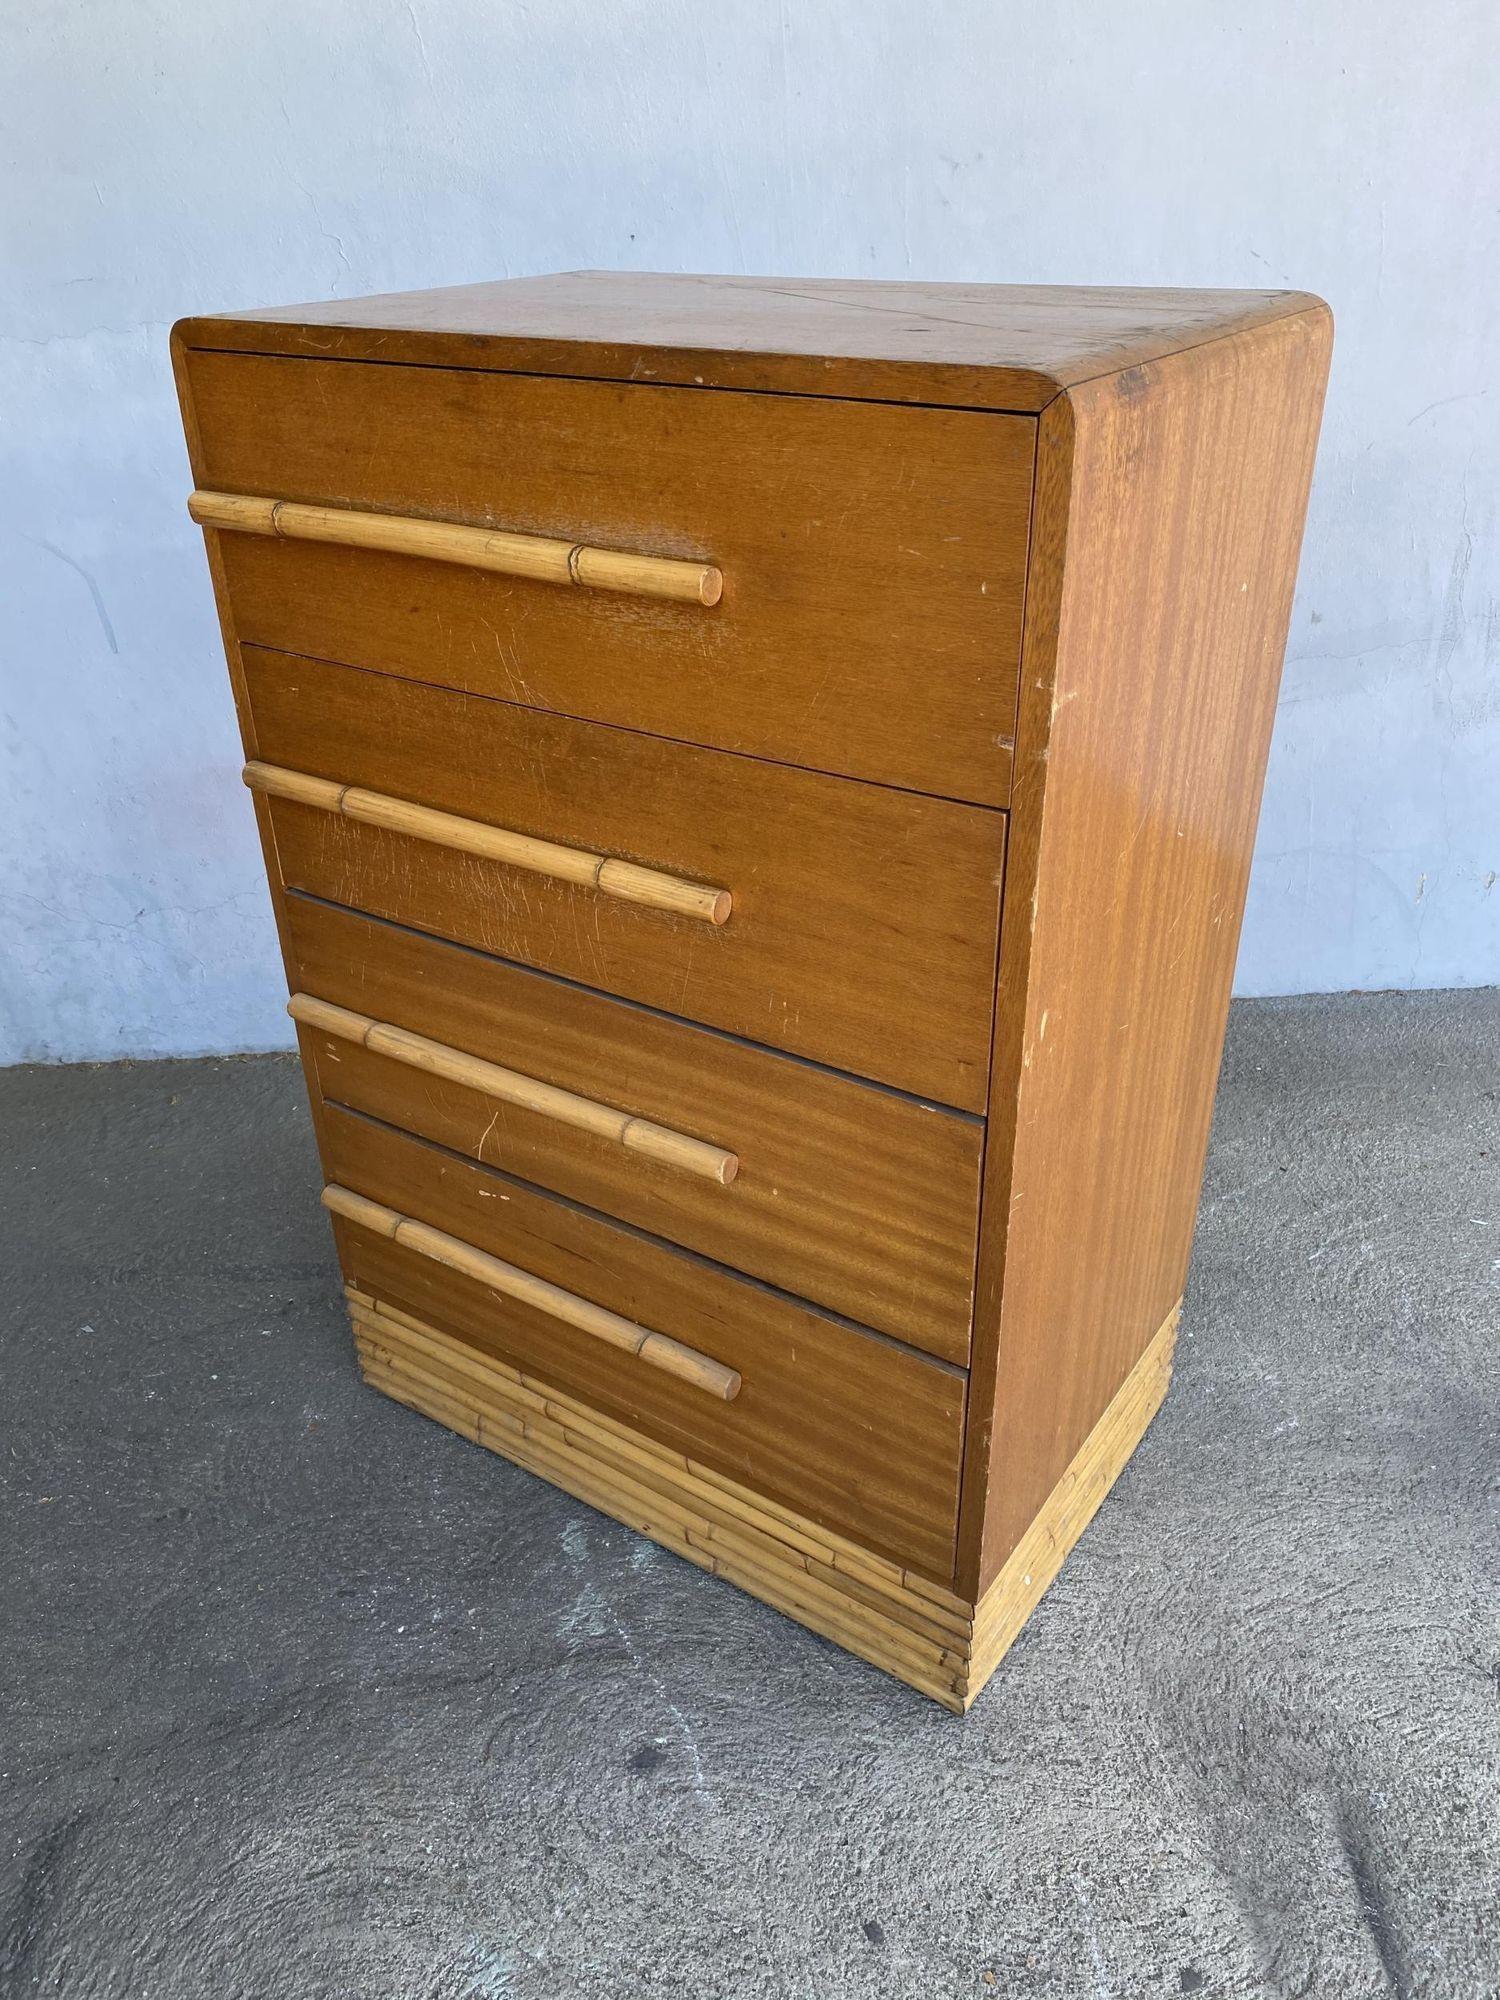 Restored Vintage Midcentury Mahogany Highboy Dresser W/ Stacked Rattan Base In Excellent Condition For Sale In Van Nuys, CA